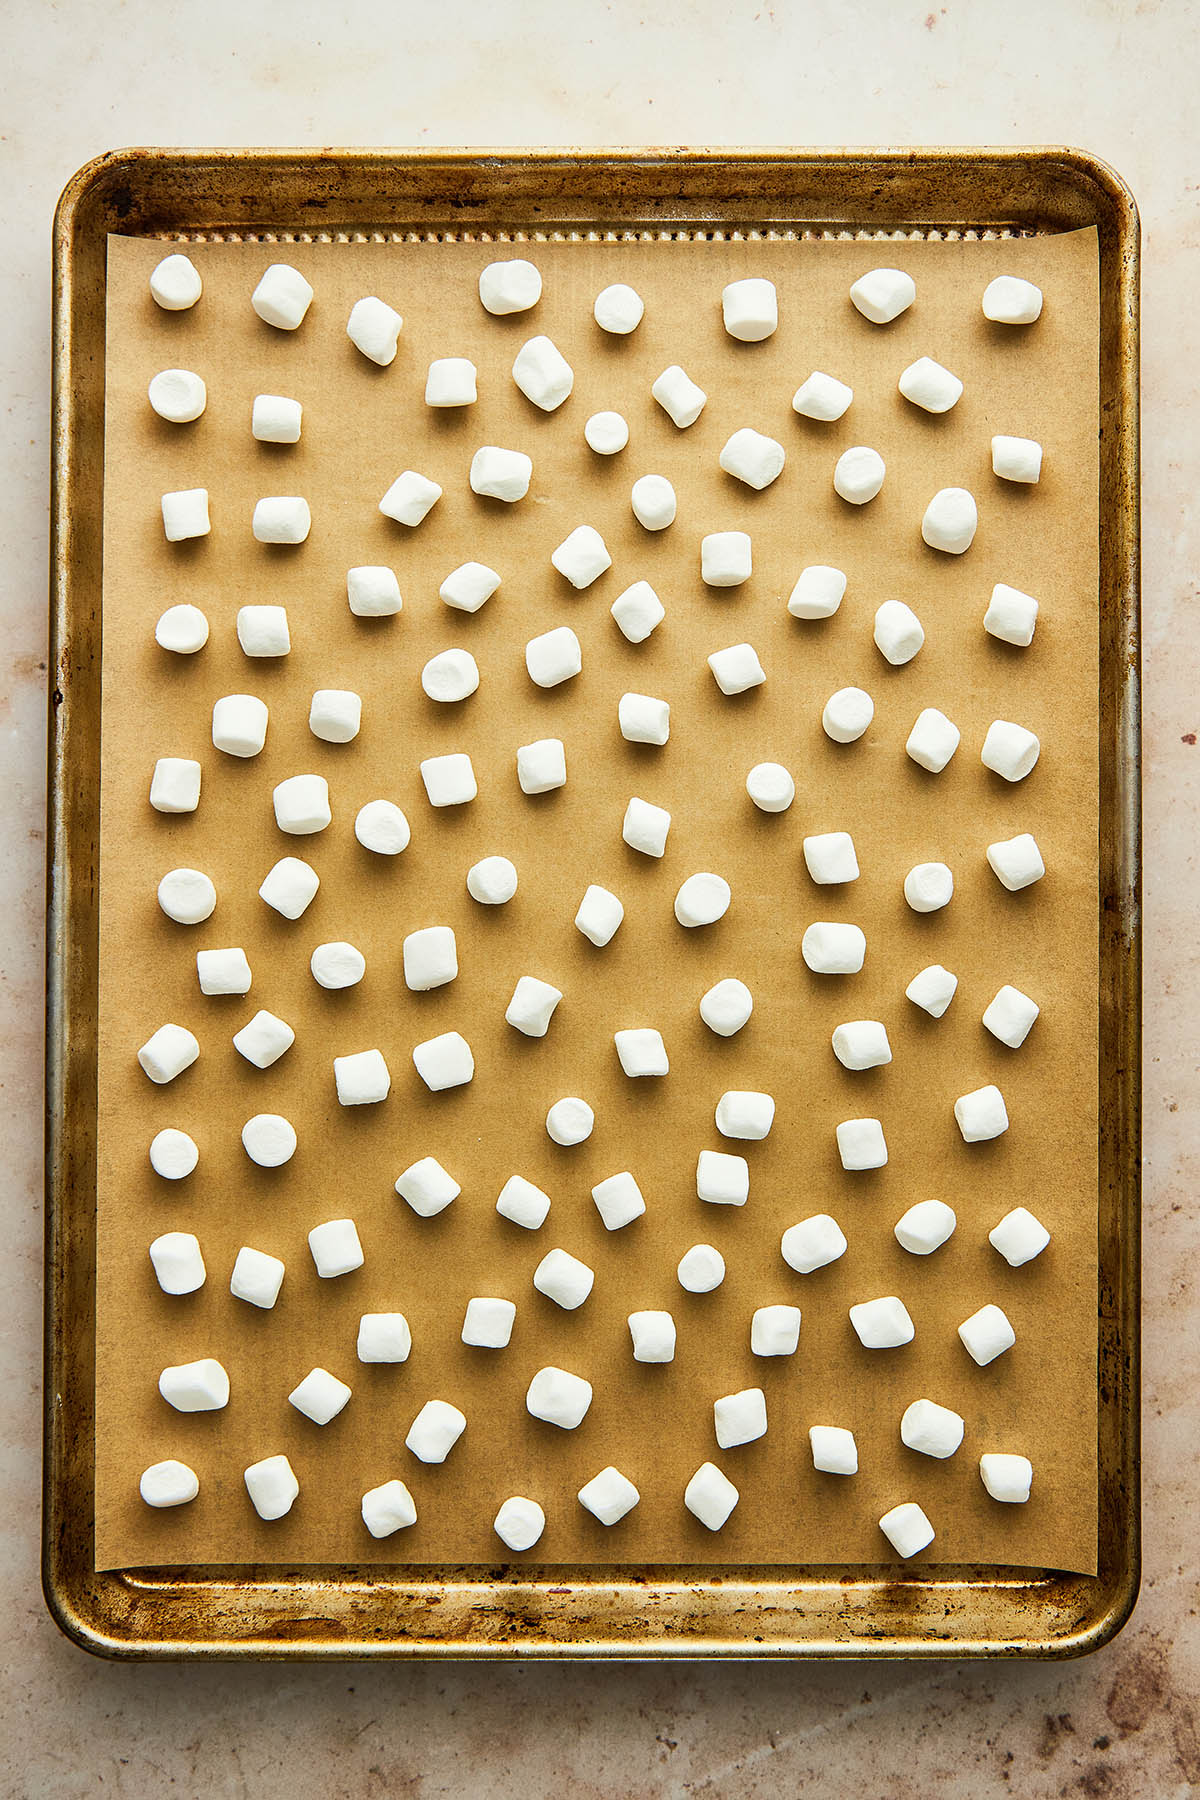 Mini marshmallows spread evenly across a baking sheet lined with parchment paper. None of the marshmallows are touching.